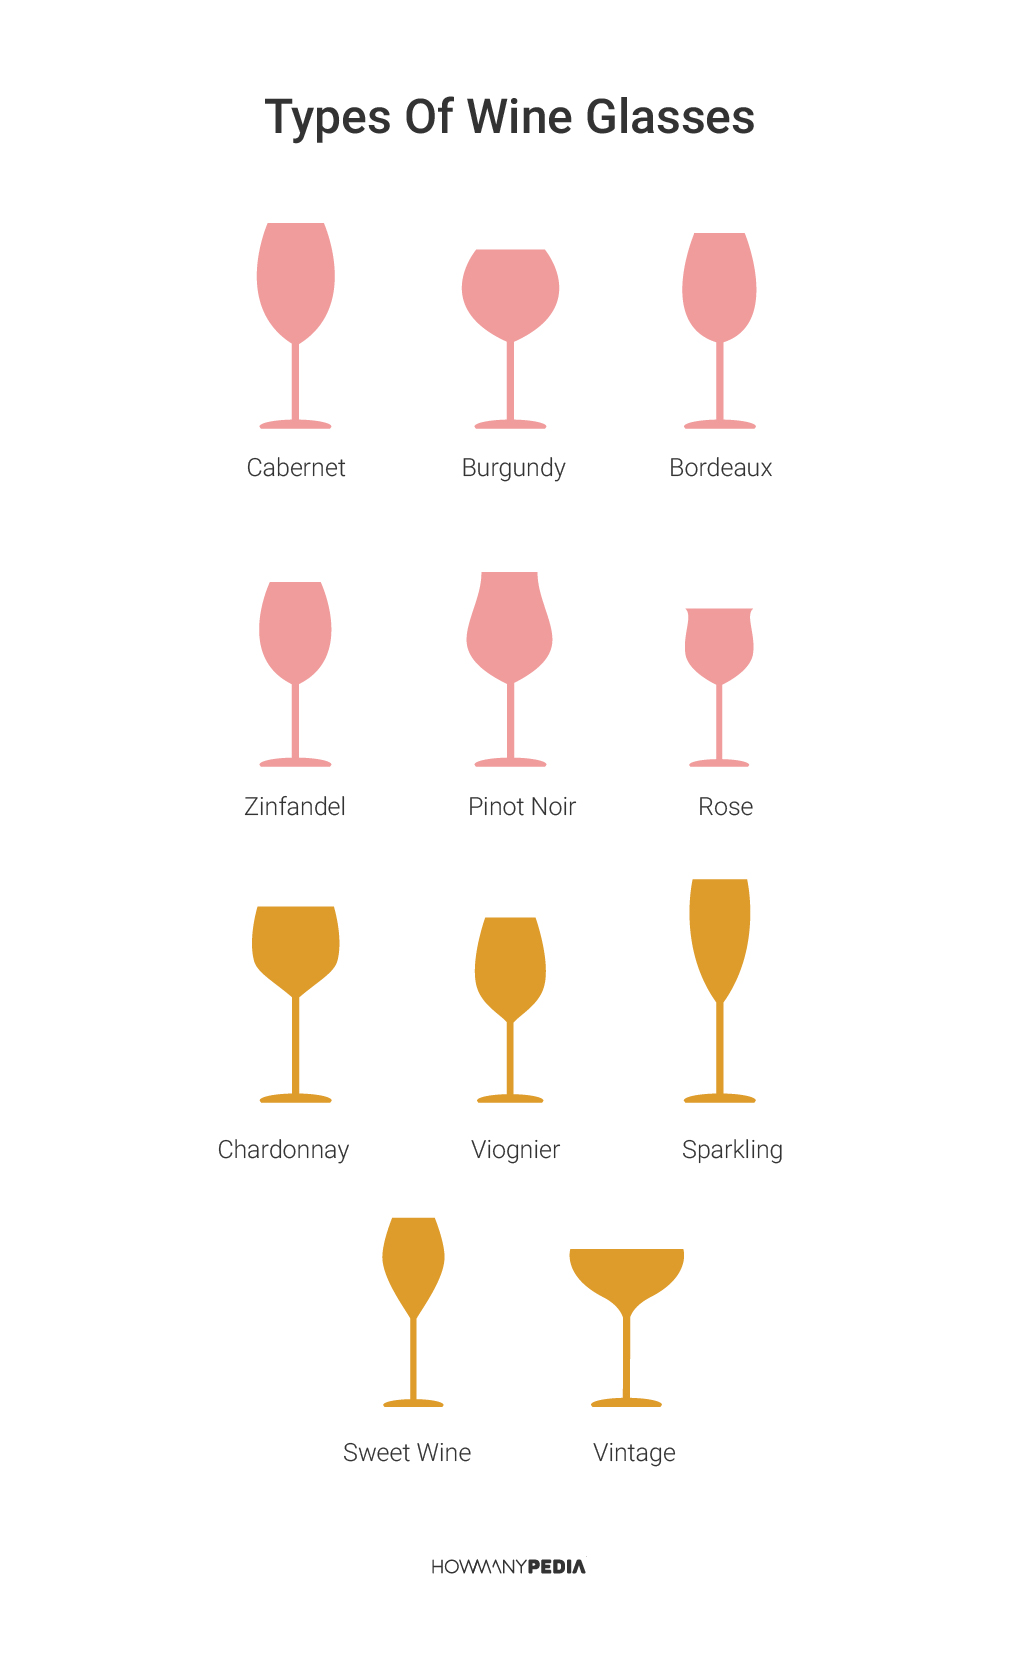 How Many Calories in a Glass of Wine - Howmanypedia
